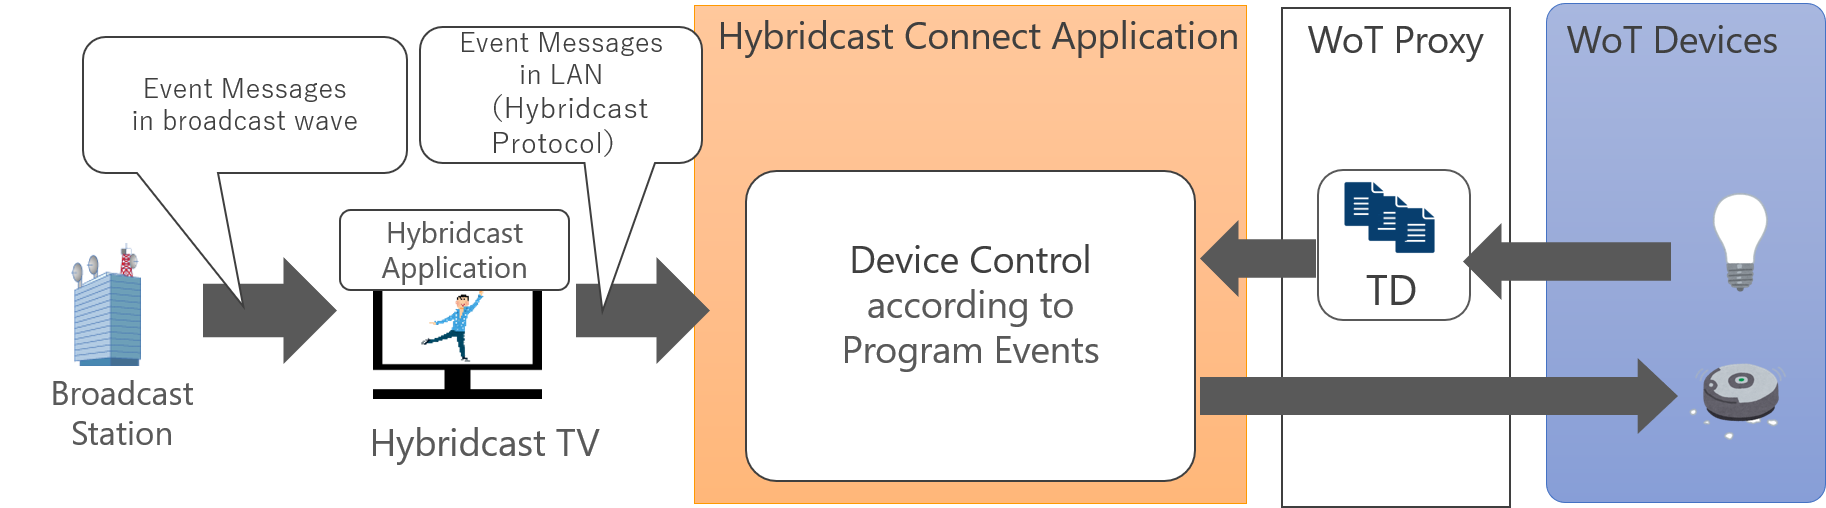 Hybridcast Connect Application